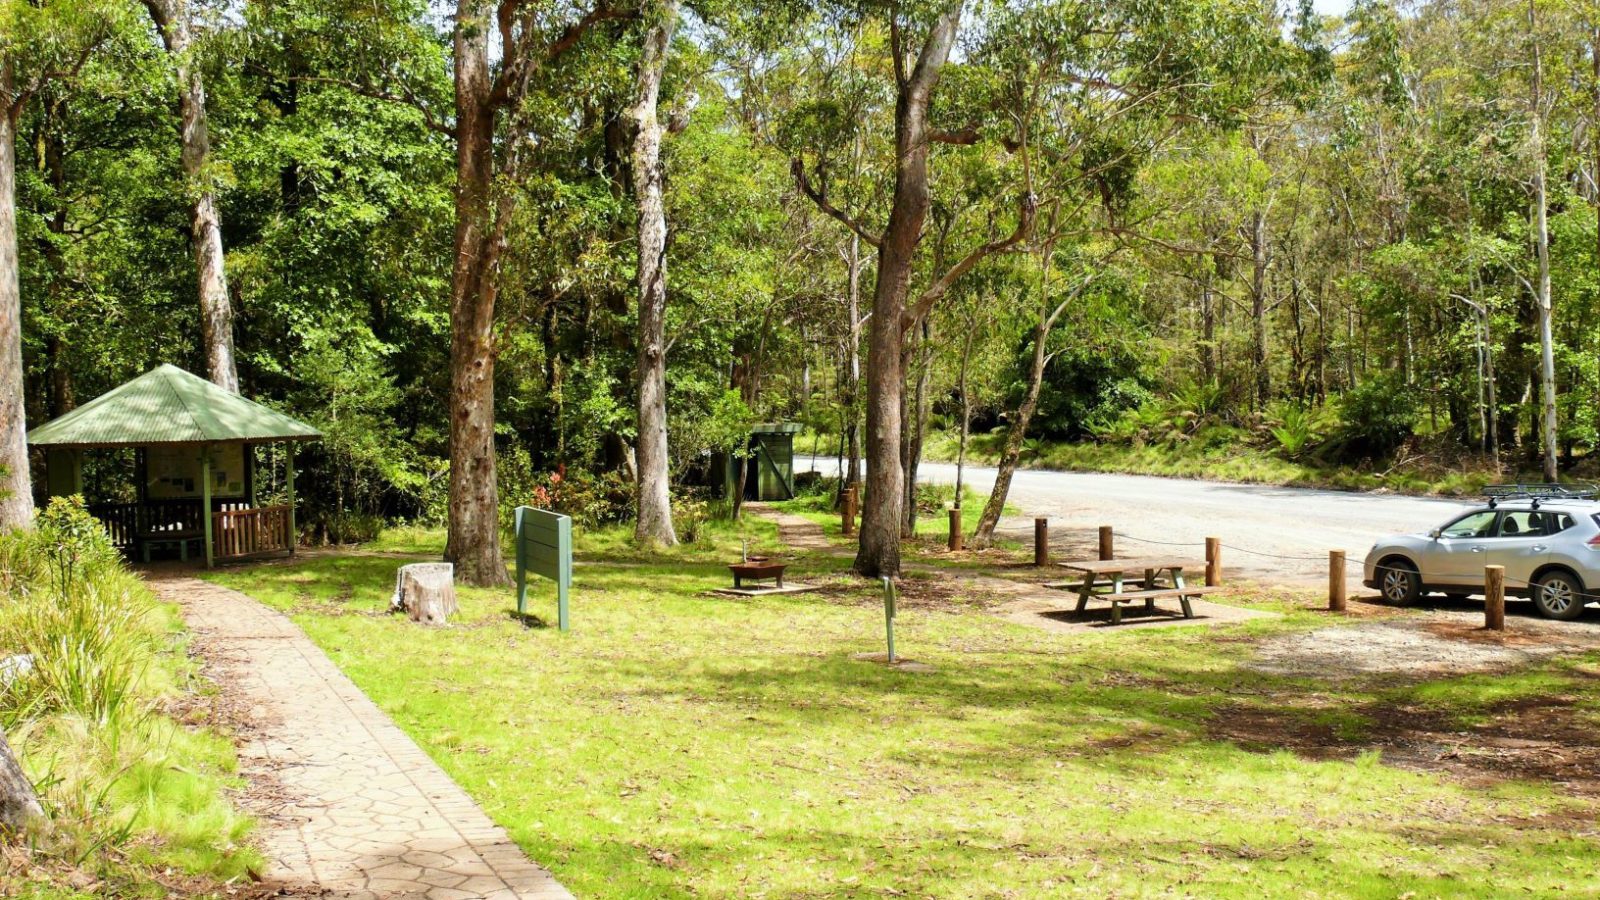 Devils Hole Picnic Area, picnic facilities, close by parking and restrooms.